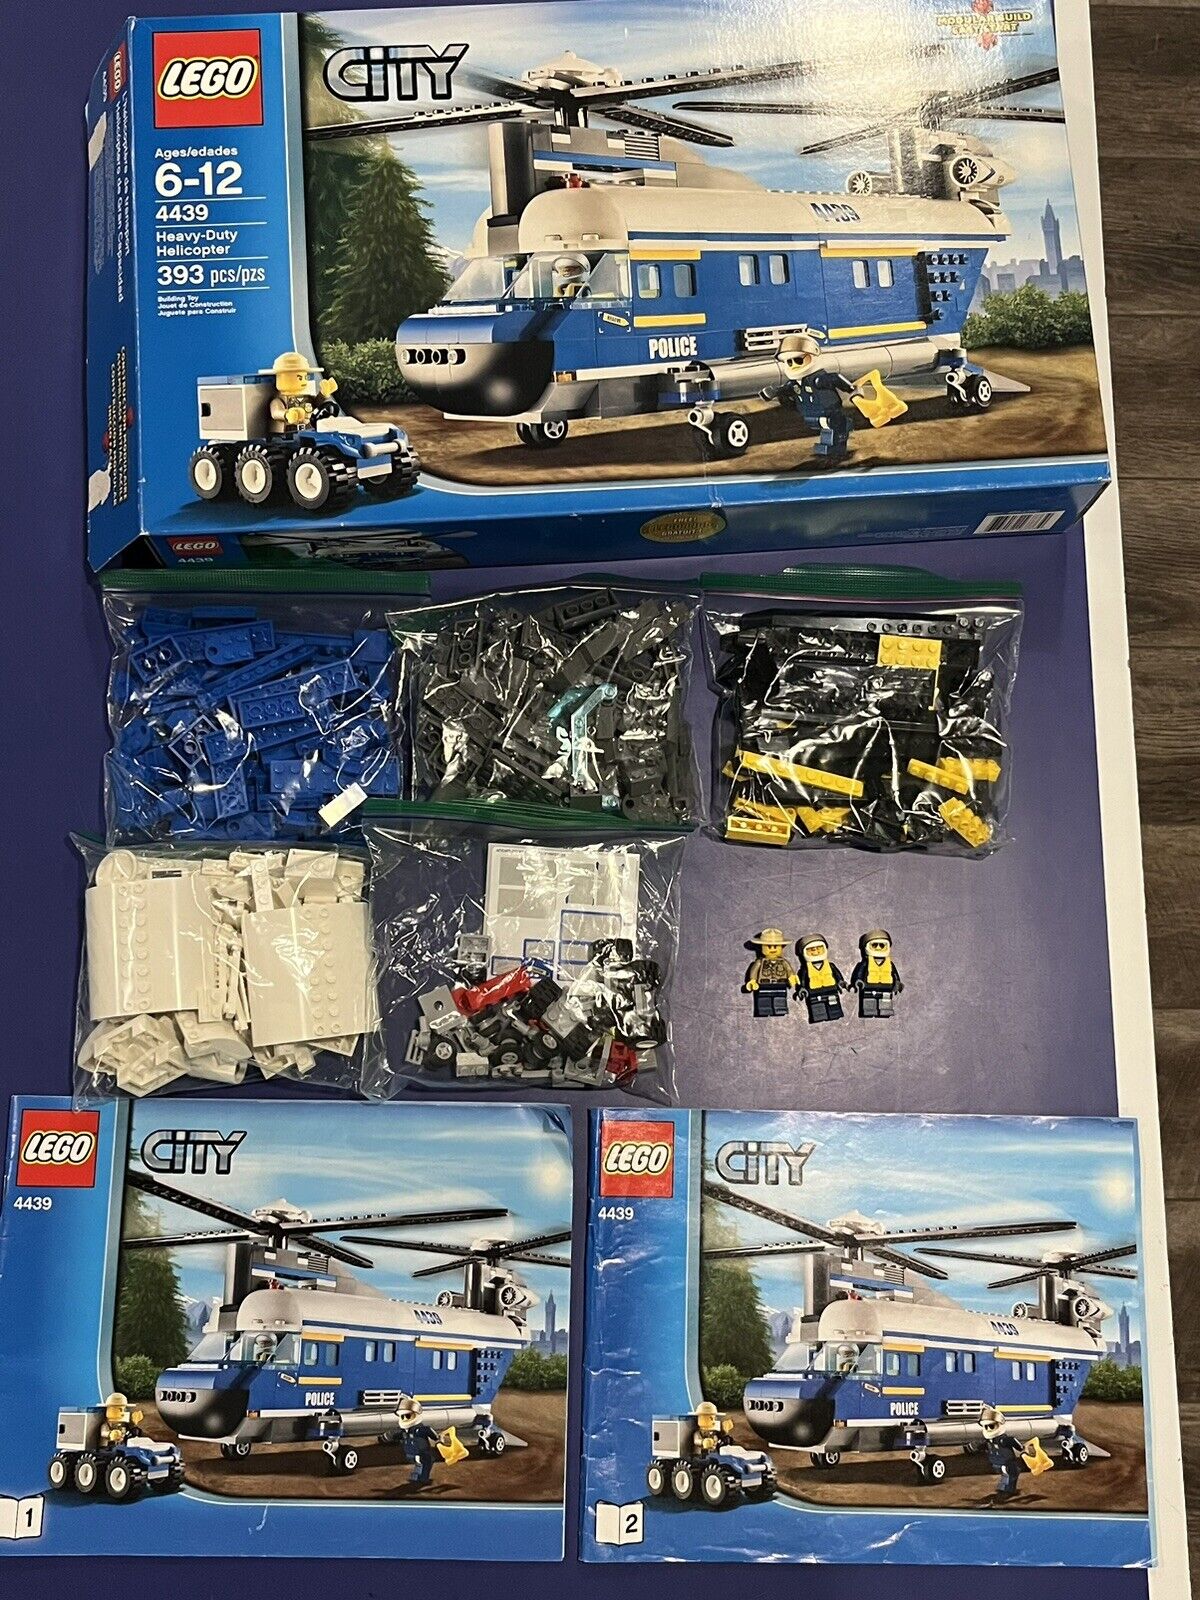 Derfra homoseksuel pad LEGO CITY: Heavy-Lift Helicopter (4439) 100% Complete Box + Manuals +  Minifigs 673419167734 | eBay